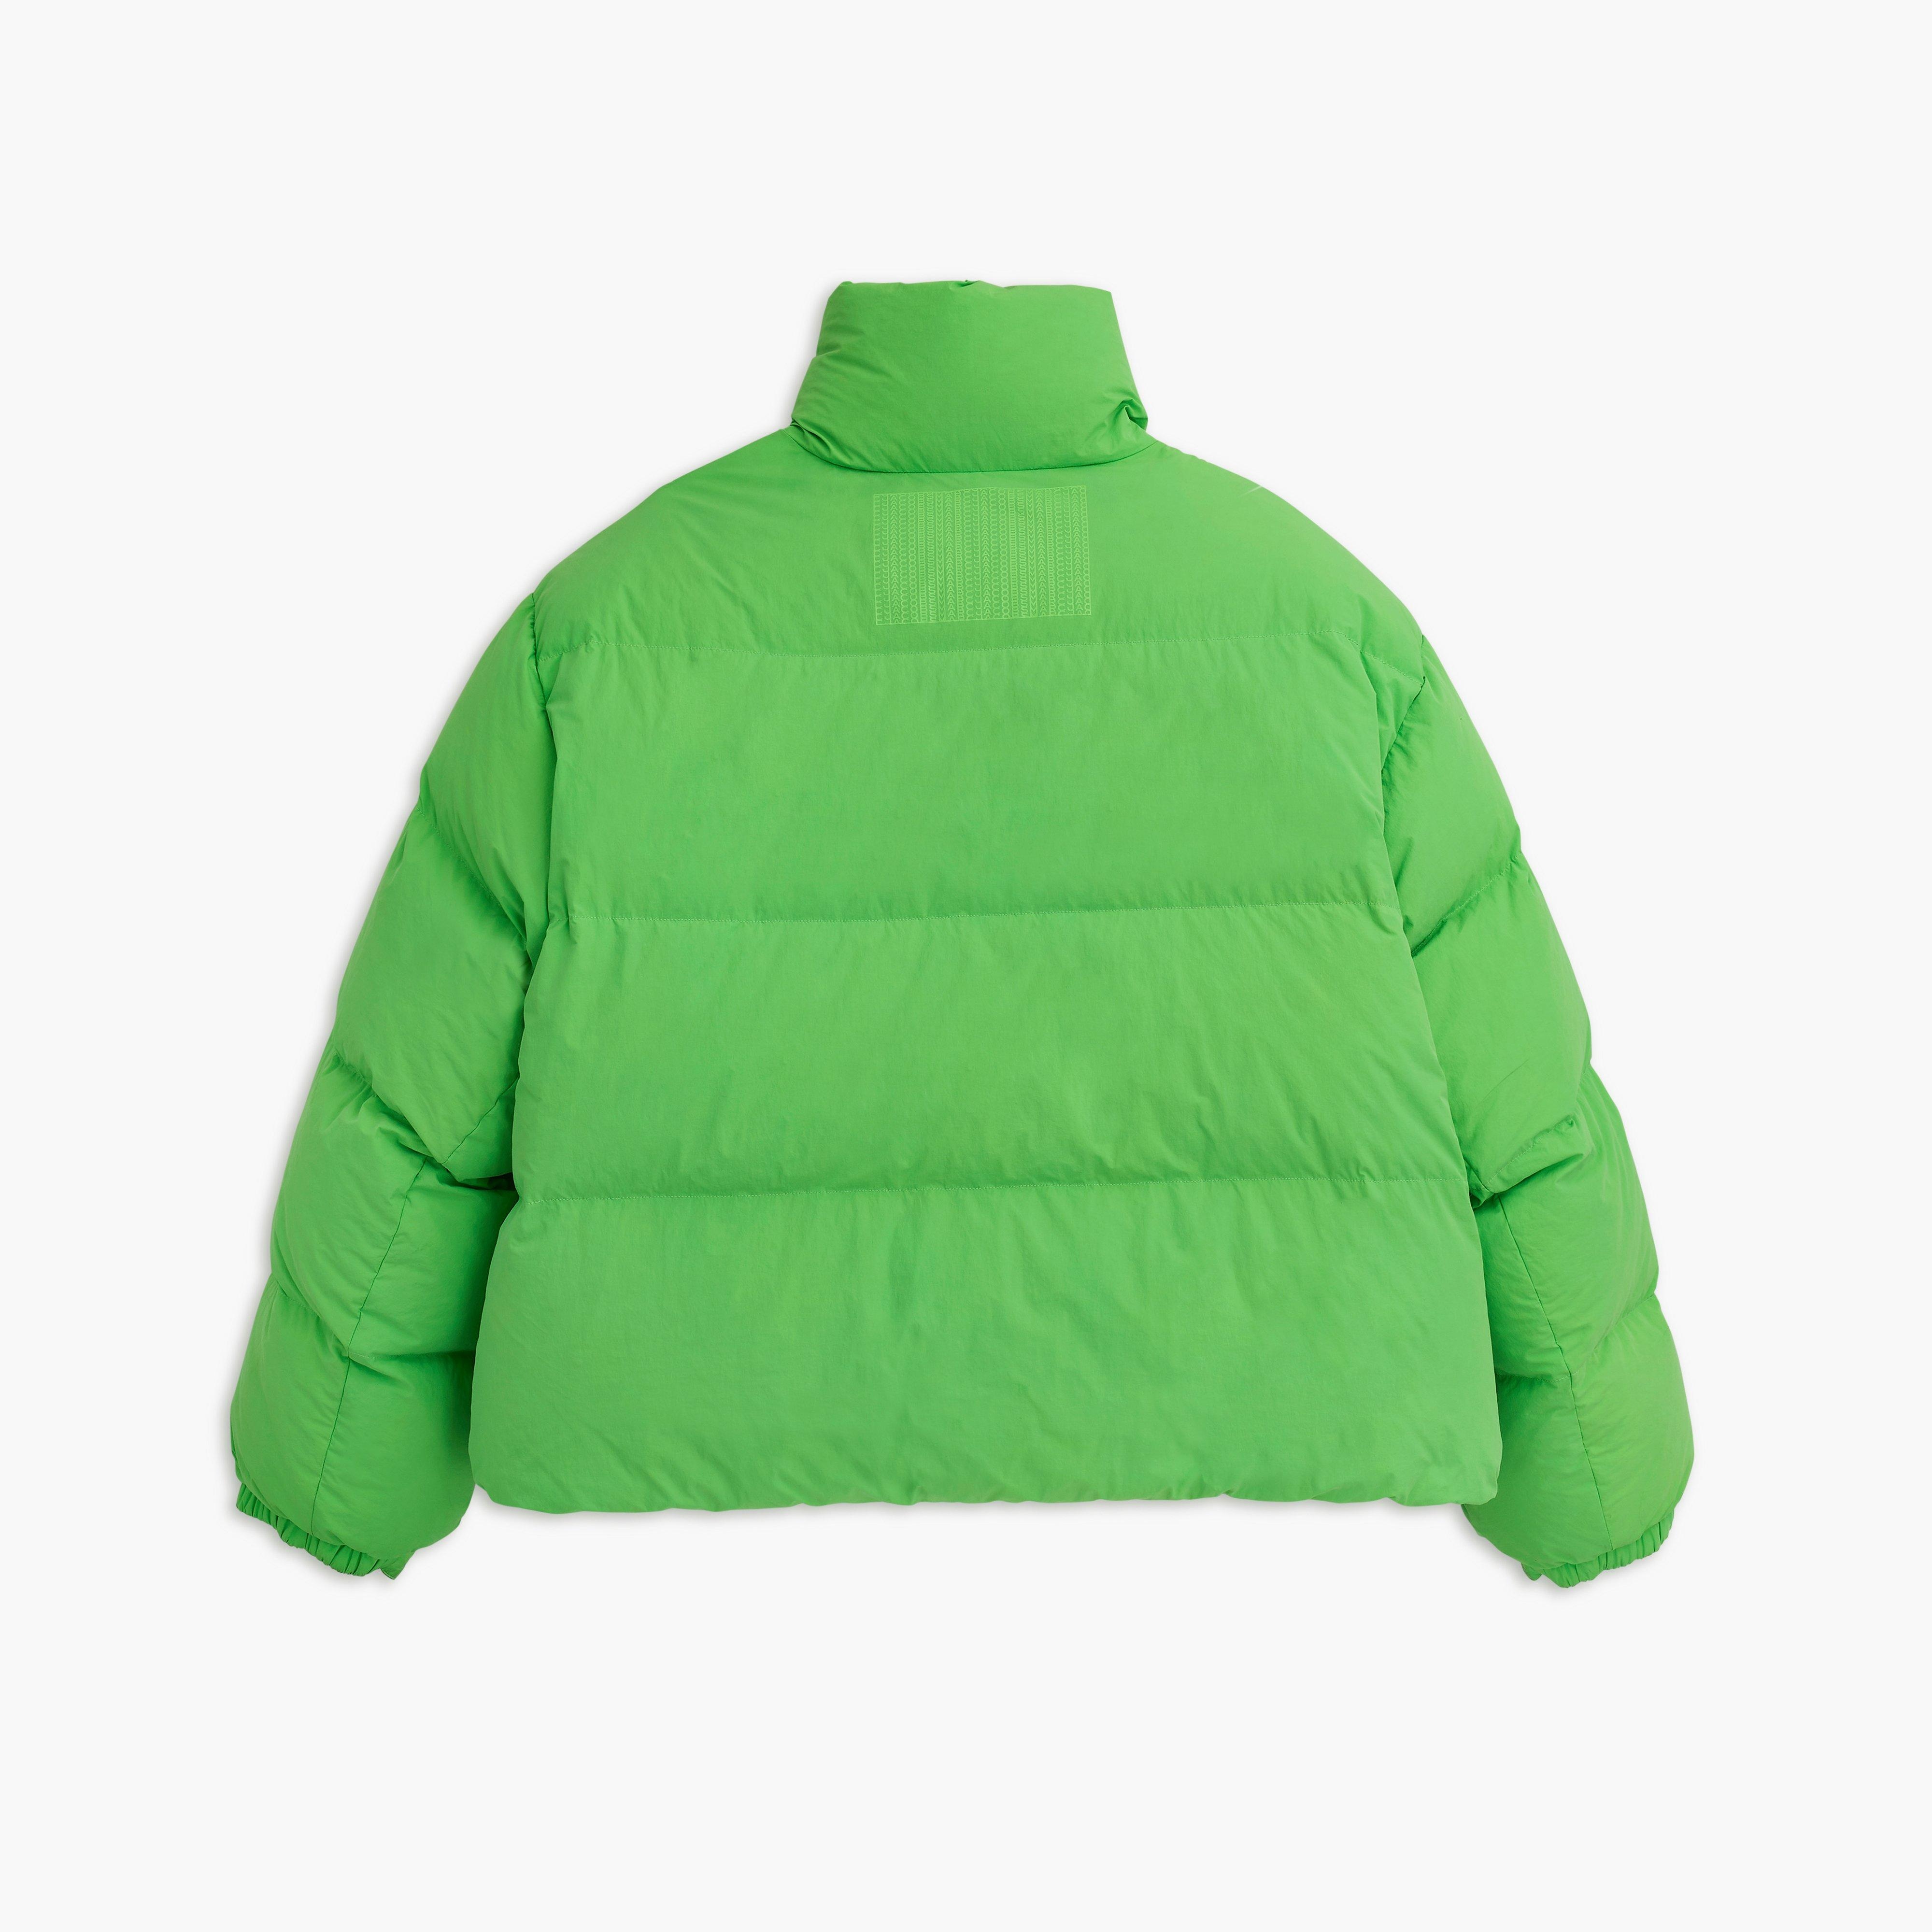 THE REVERSIBLE PUFFER - 5